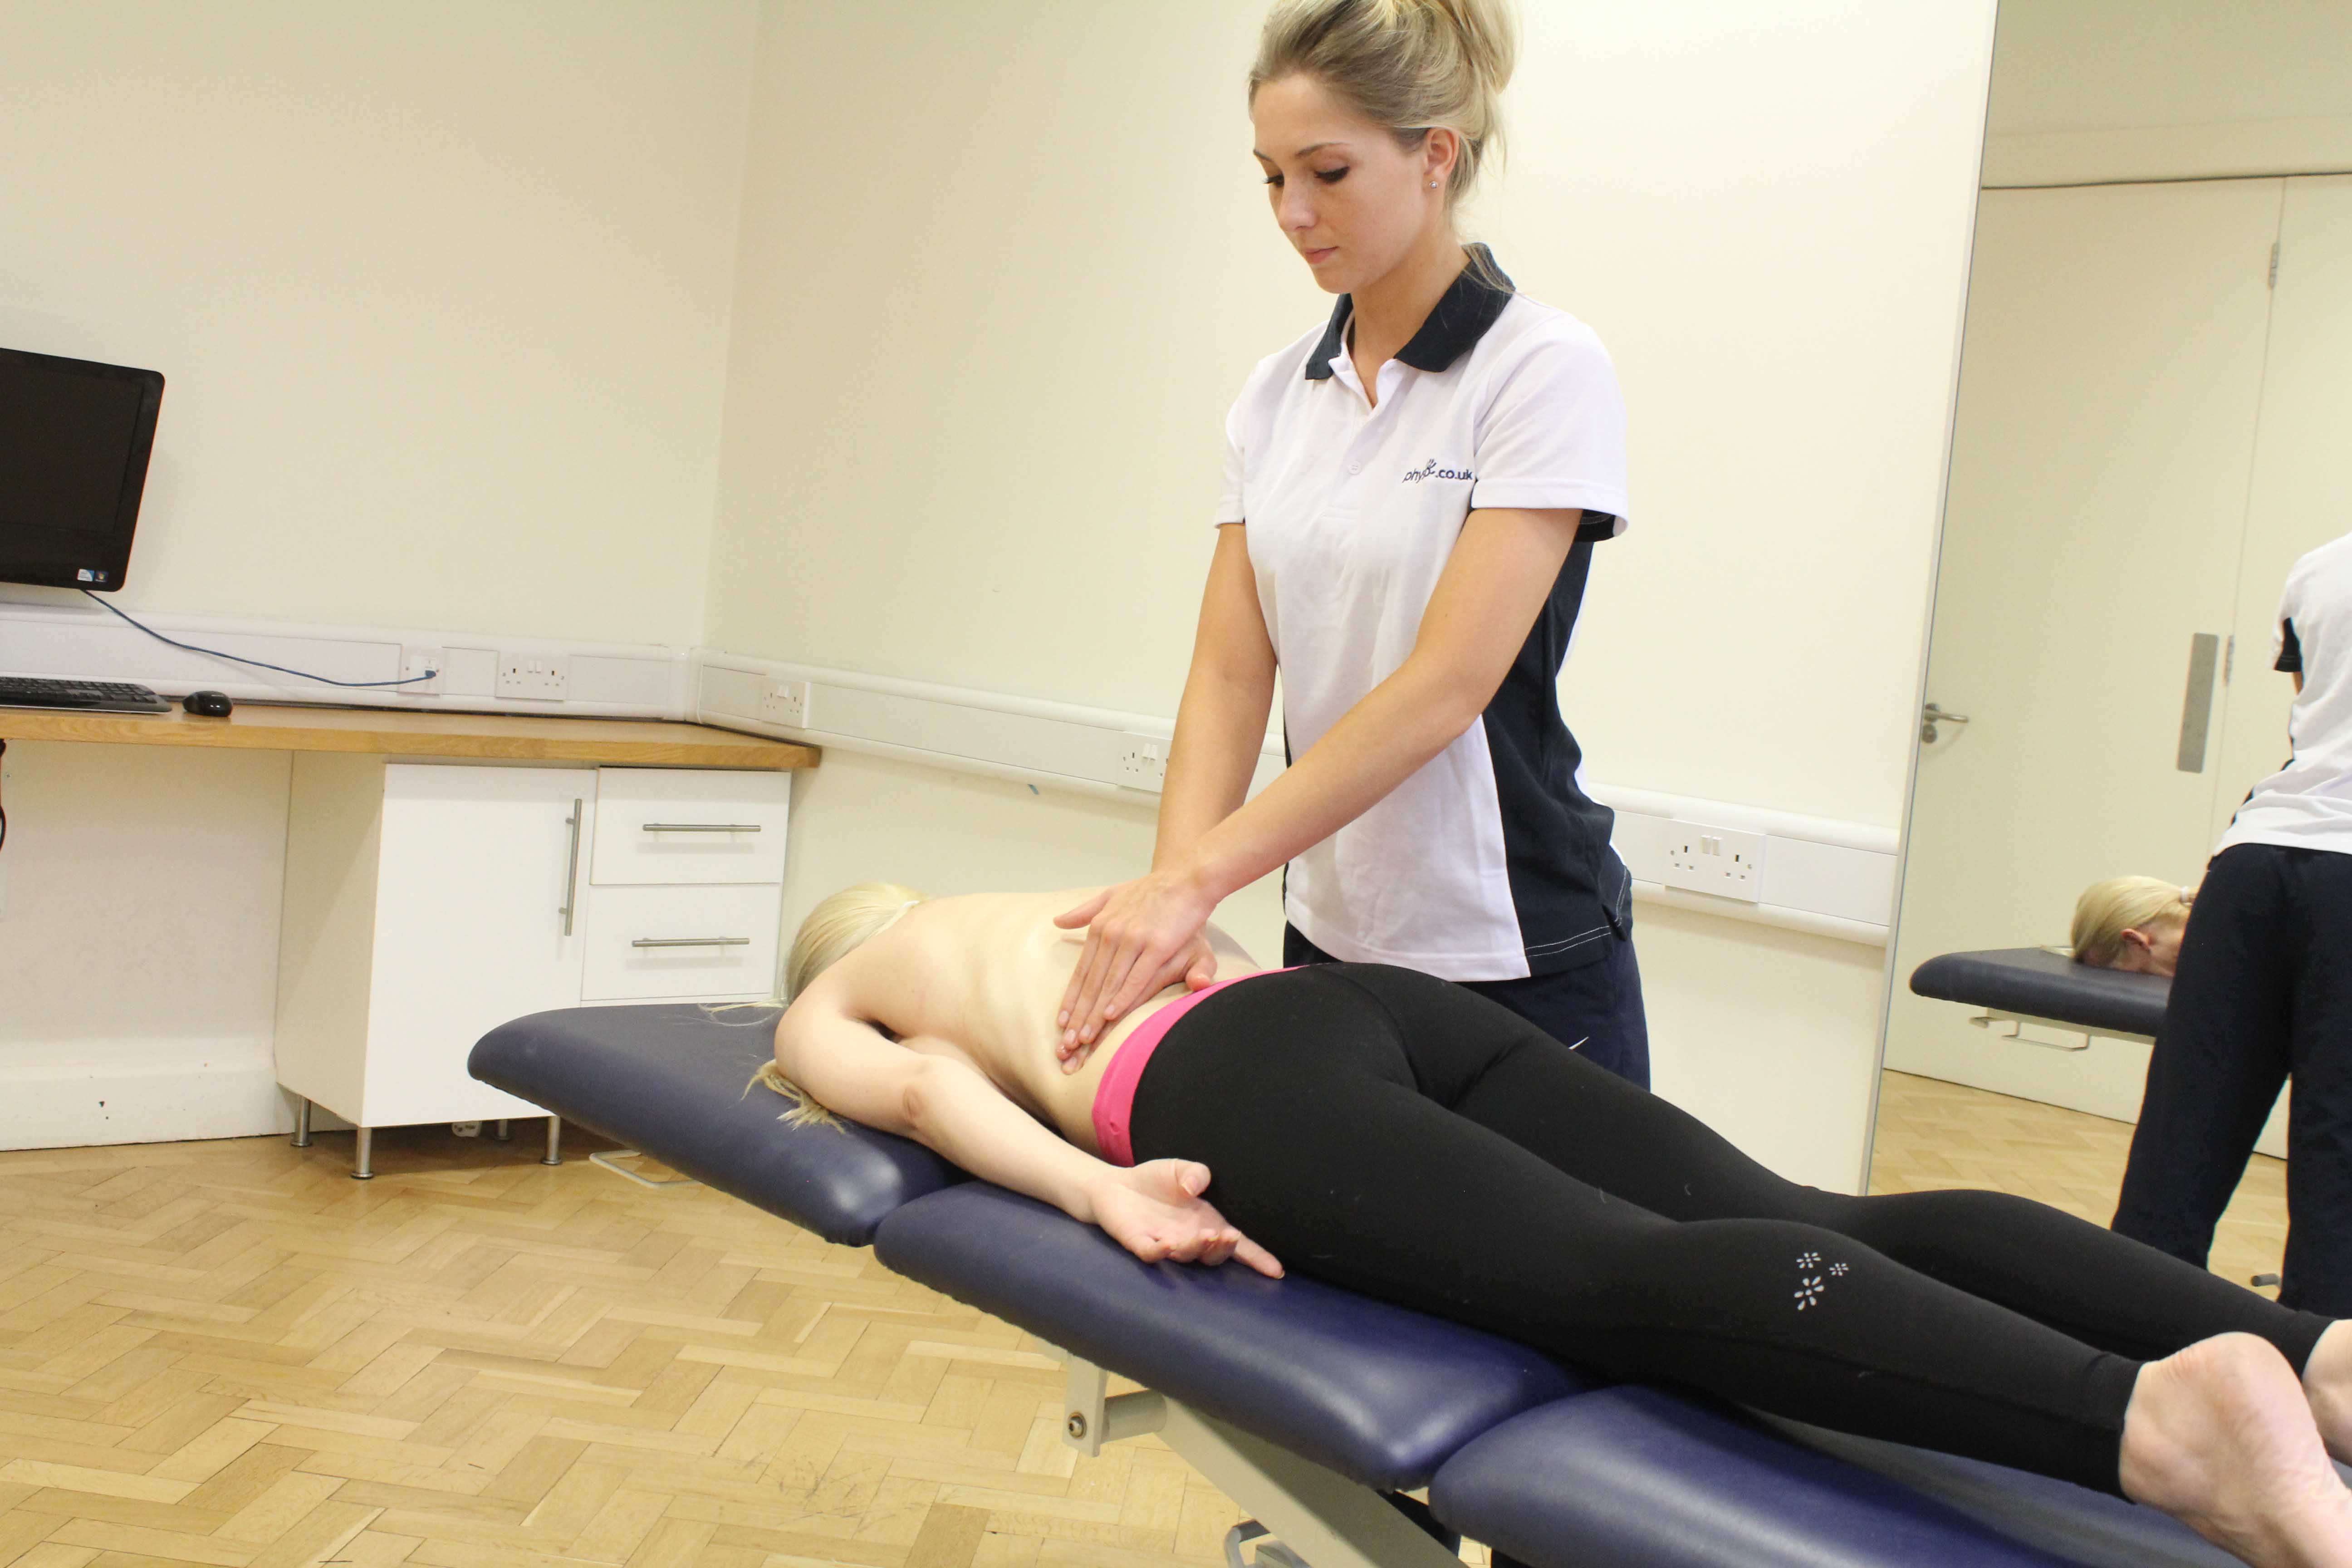 Soft tissue massage of the lower back muscles and connective tissue by specialist therapist